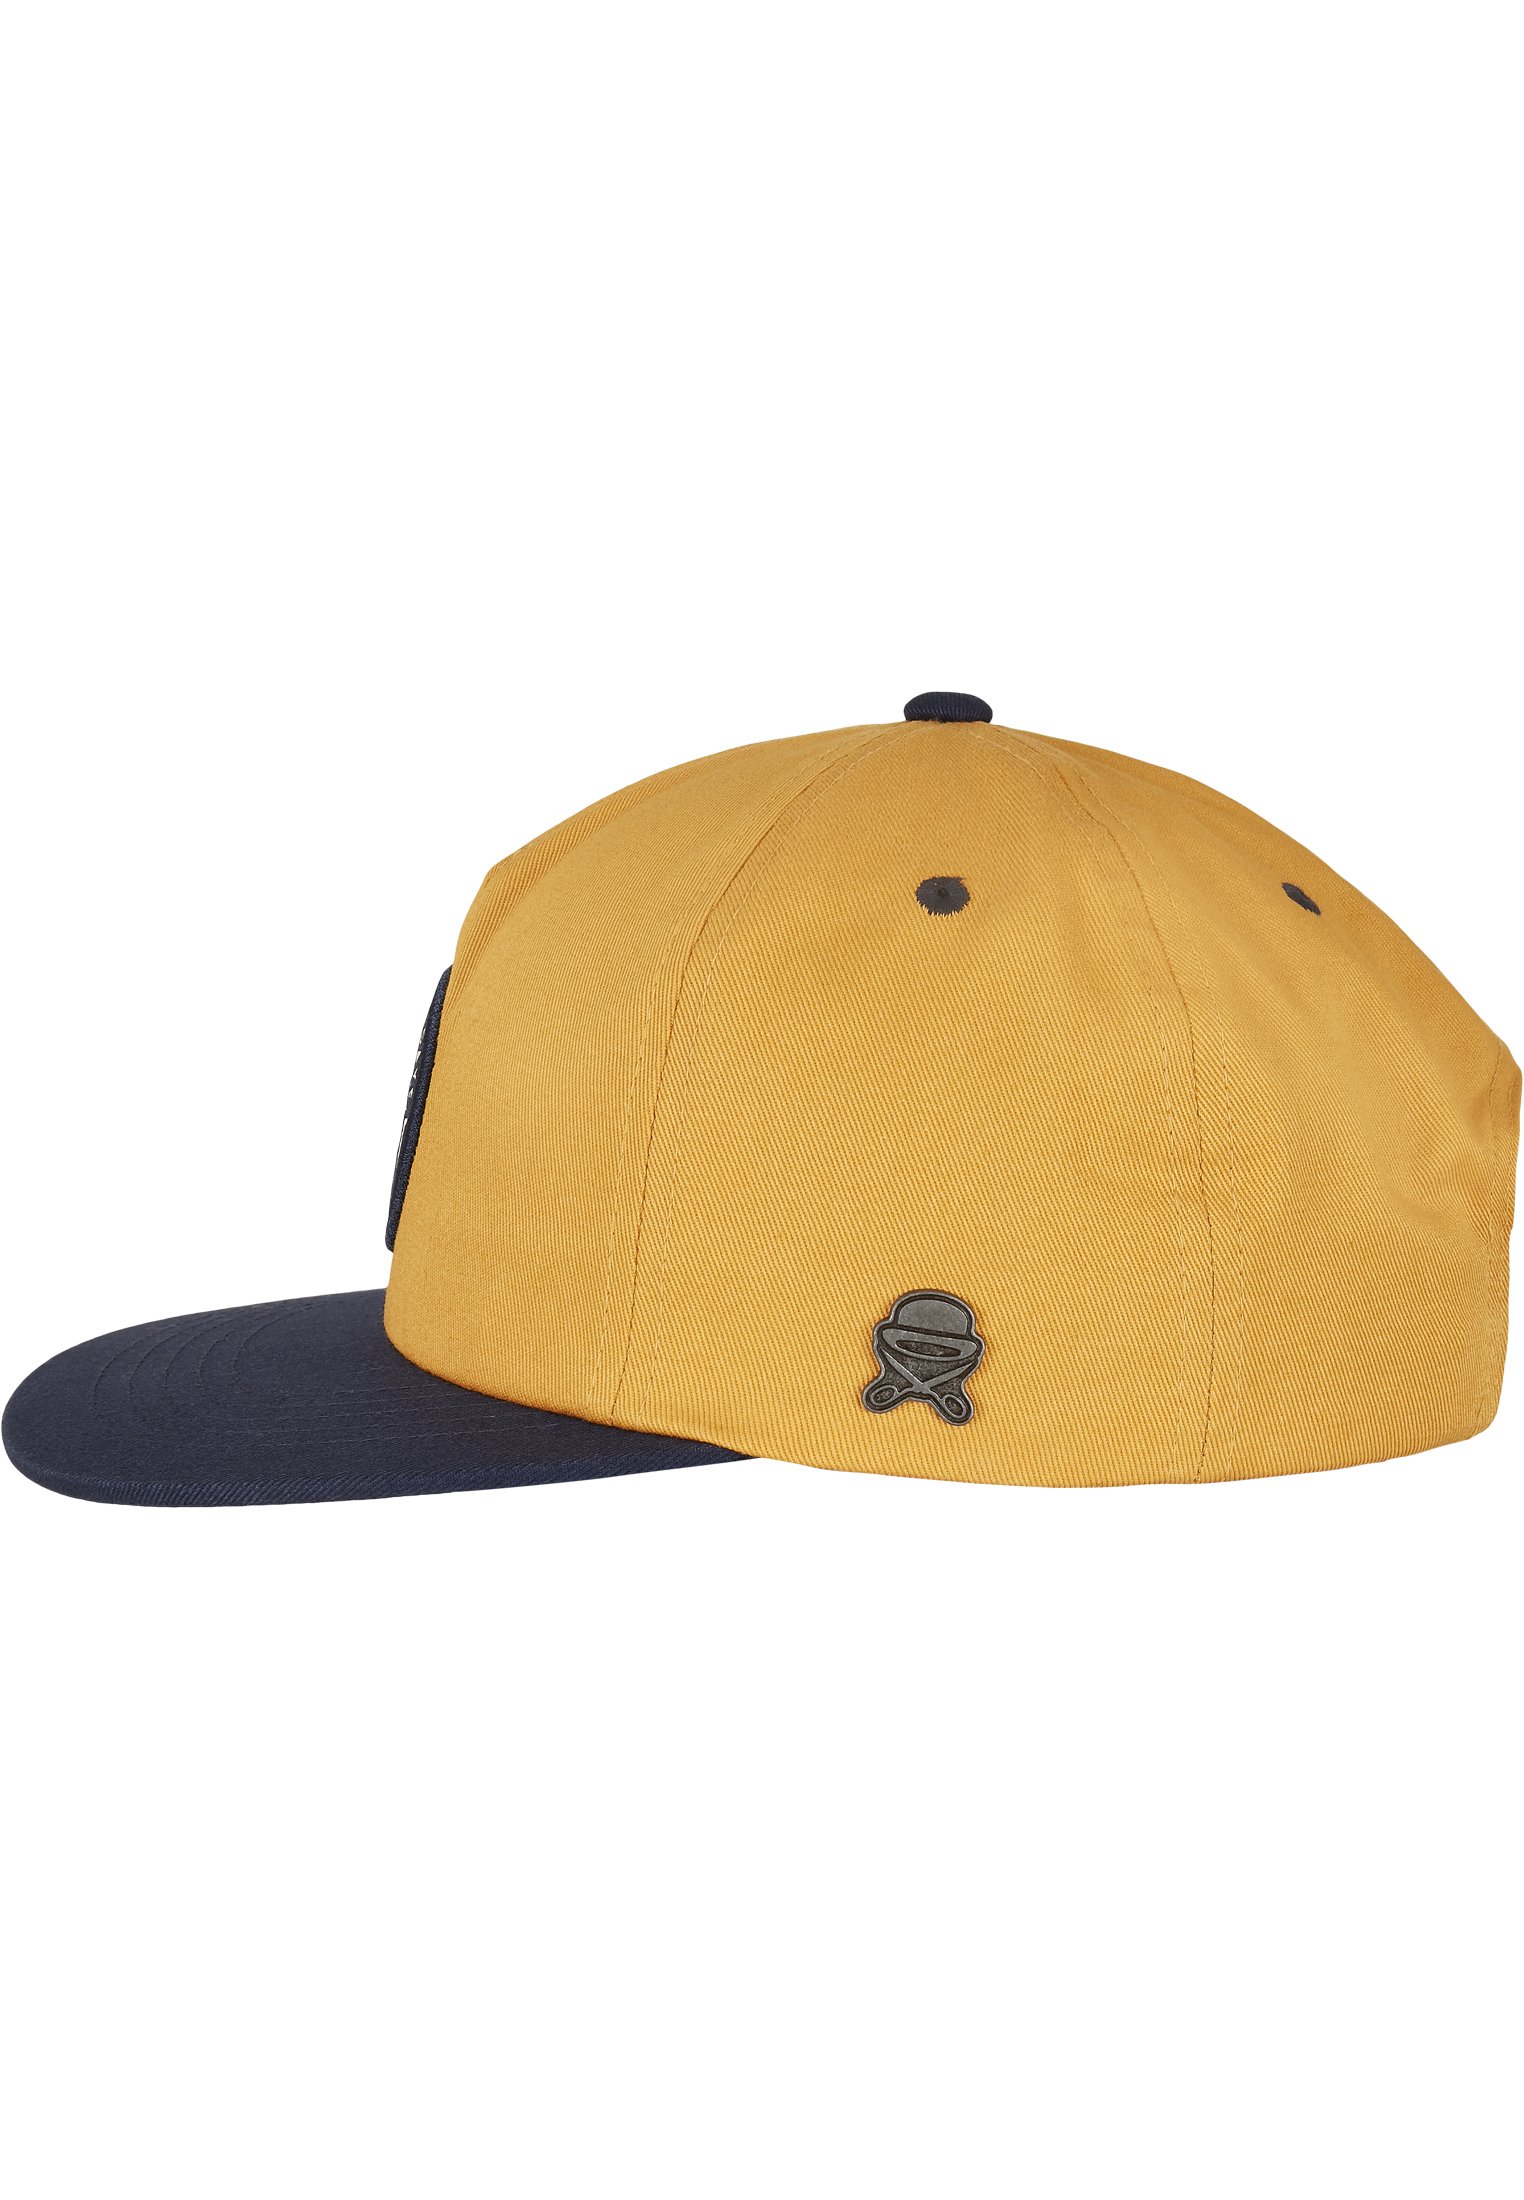 C&S CL Holidays Strong Deconstructed Cap yellow/mc one size